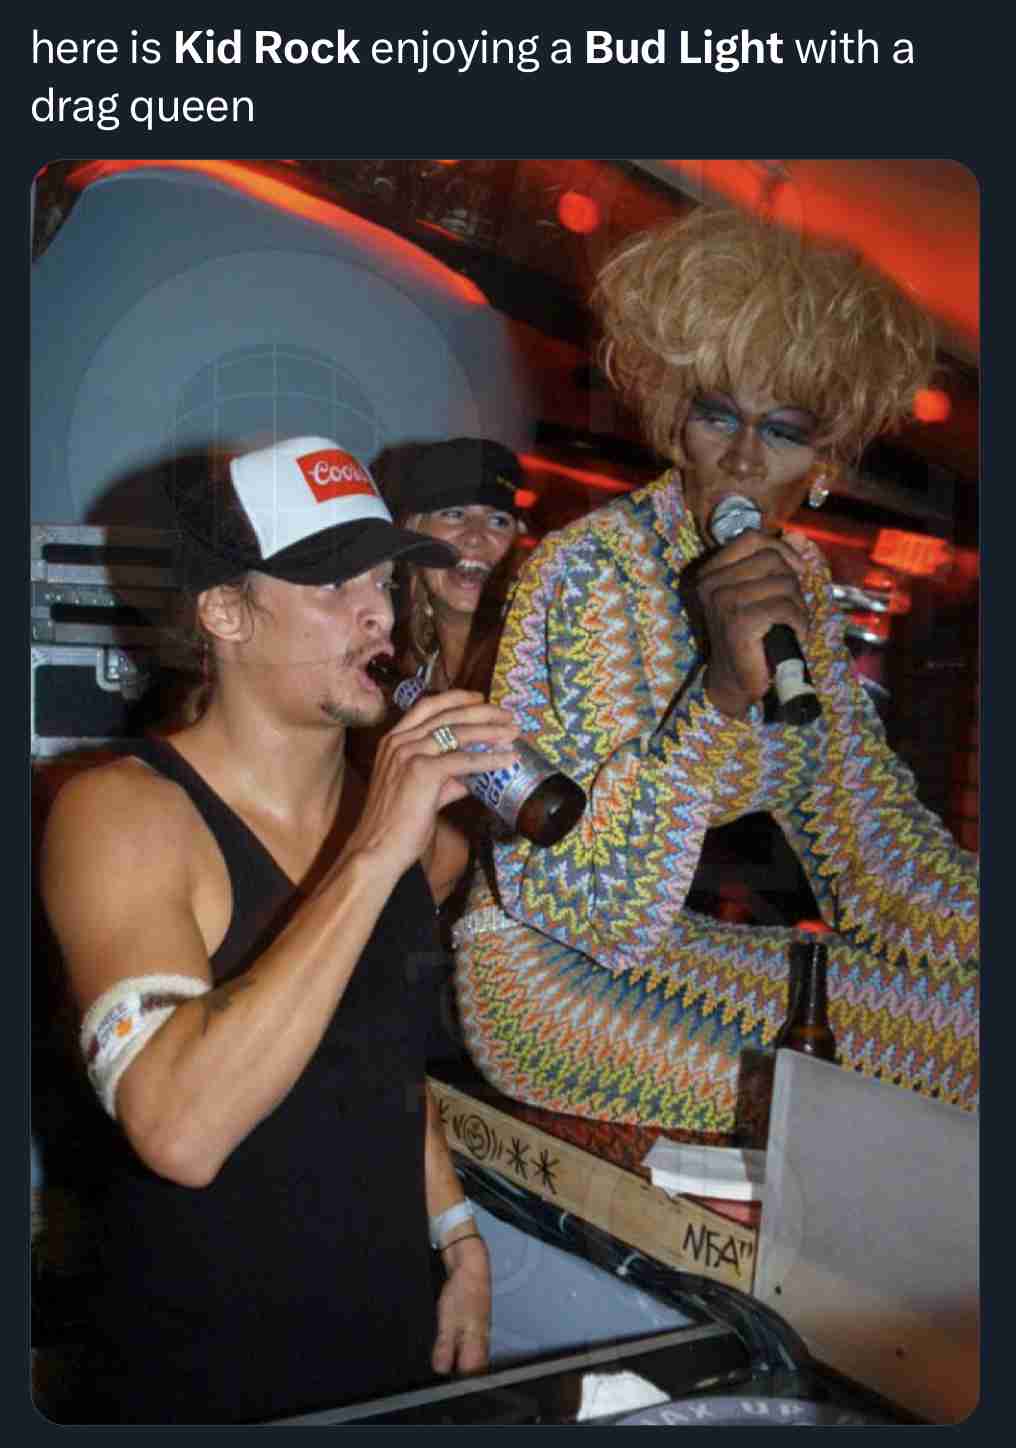 kid rock with drag queen drinking bud light